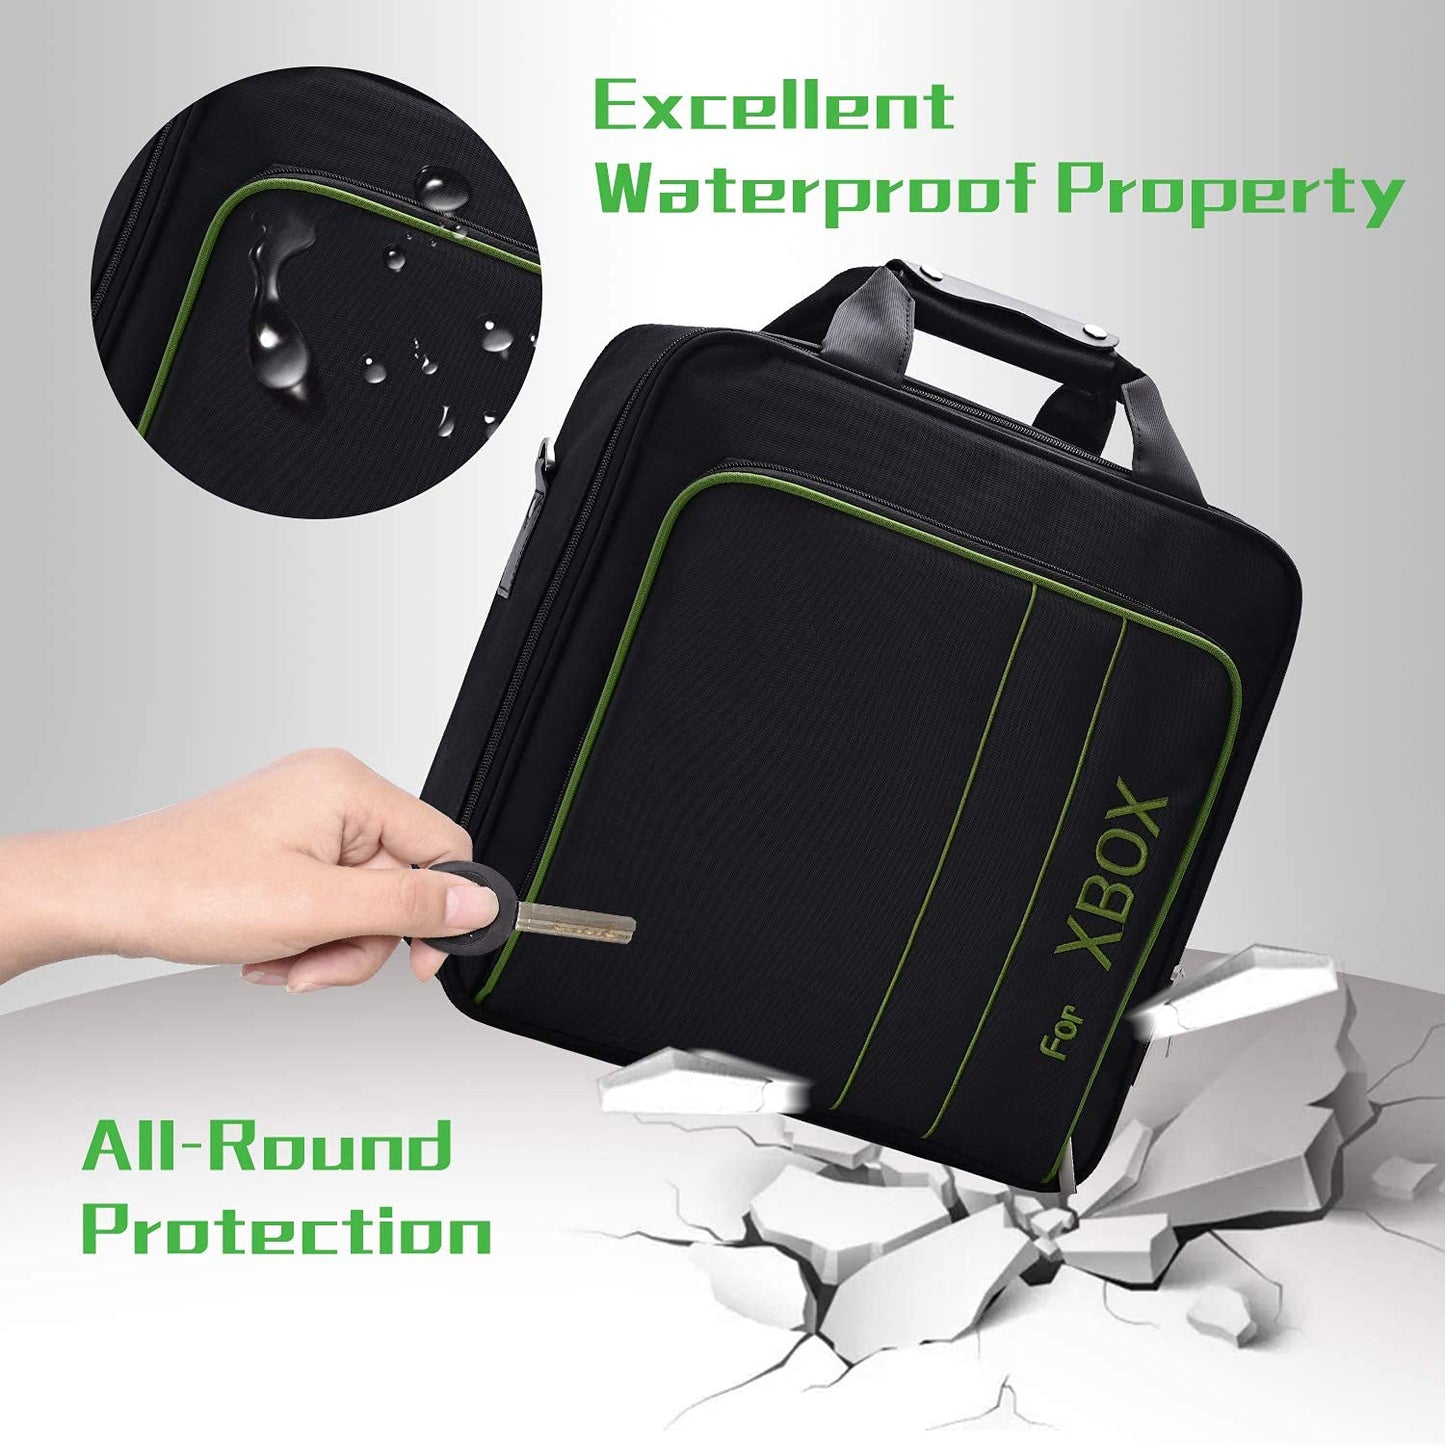 G-STORY Case Storage Bag for Xbox Series X Xbox Series S Console Carrying Case